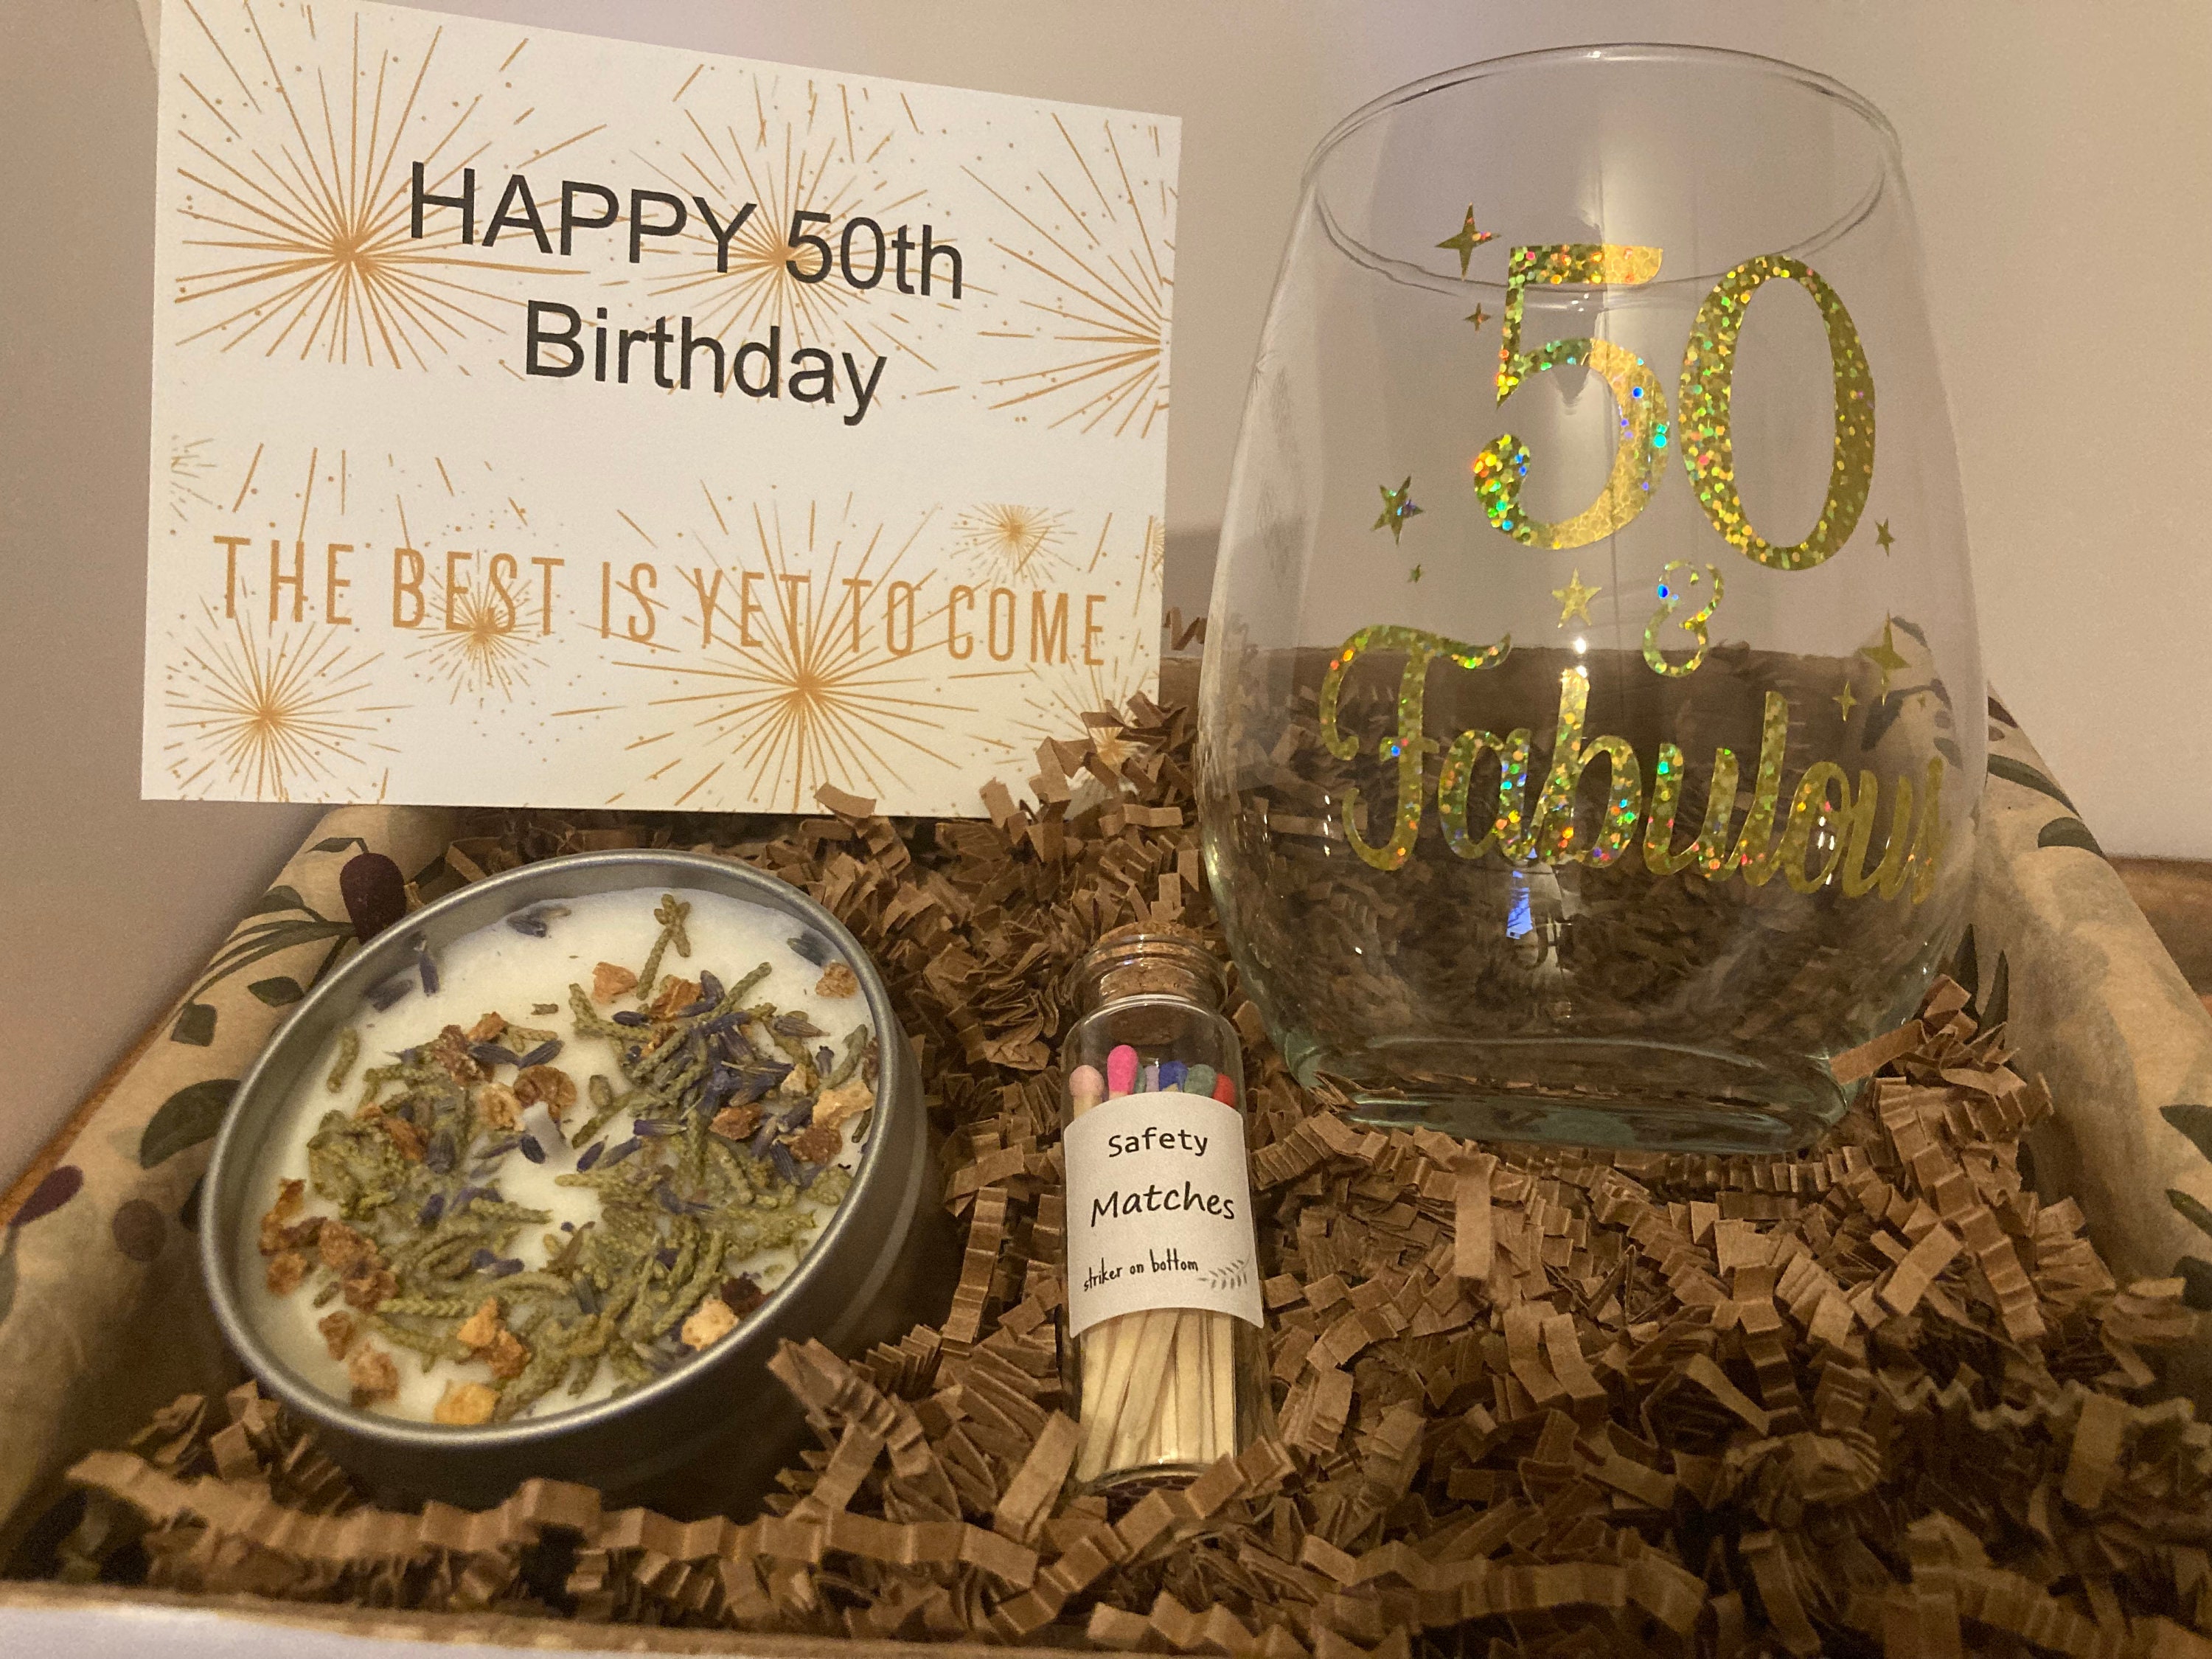 50th Birthday Gift For Women, 50th Birthday Gift Box For Friend, Happy 50th  Birthday, Gift for Her, Personalized Spa Set, Candle Gift Set